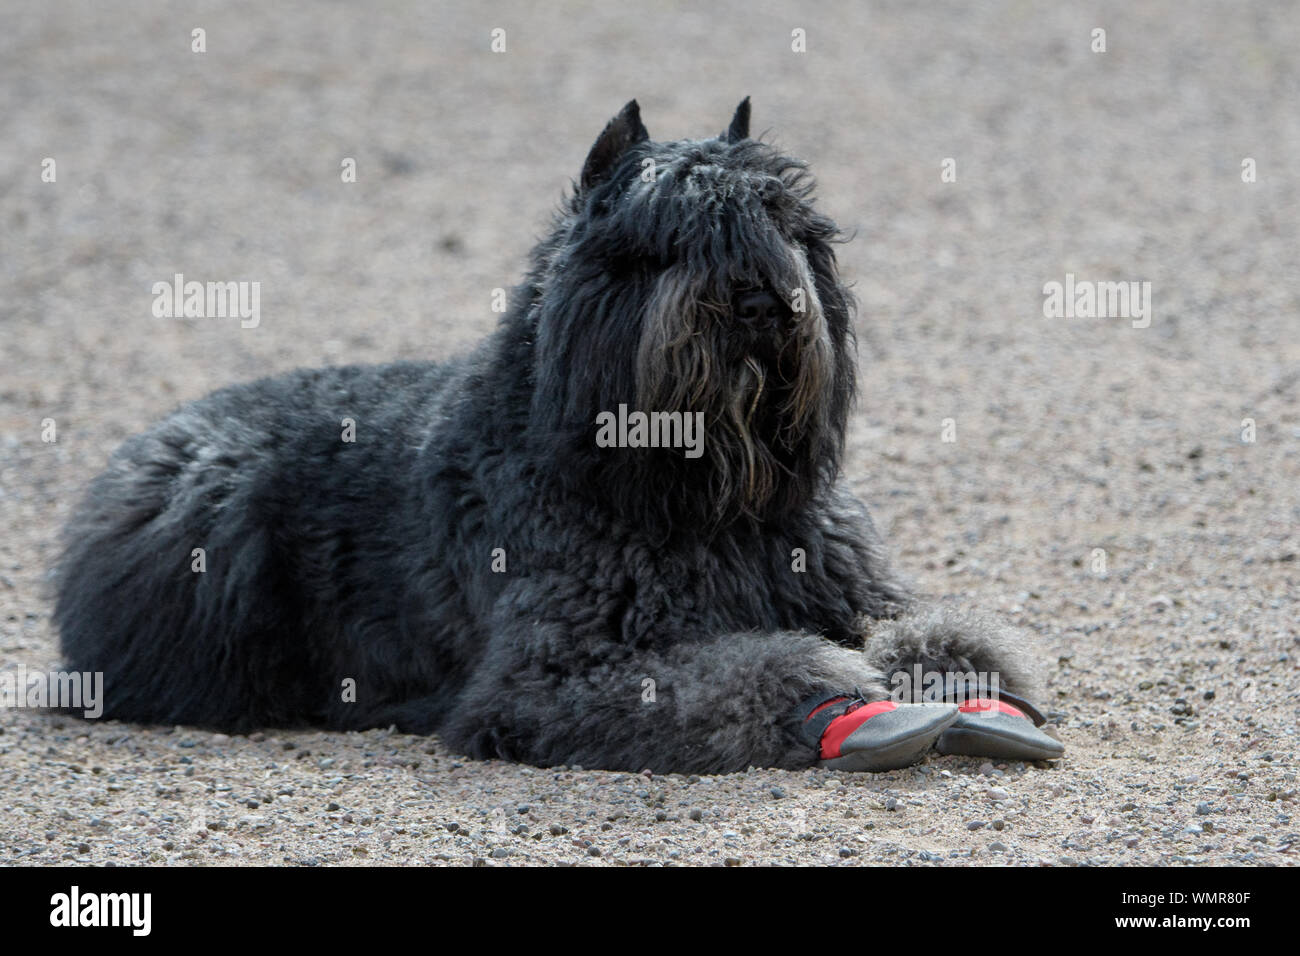 Bouvier des Flandres taking a break on the gravel wearing protective boots Stock Photo